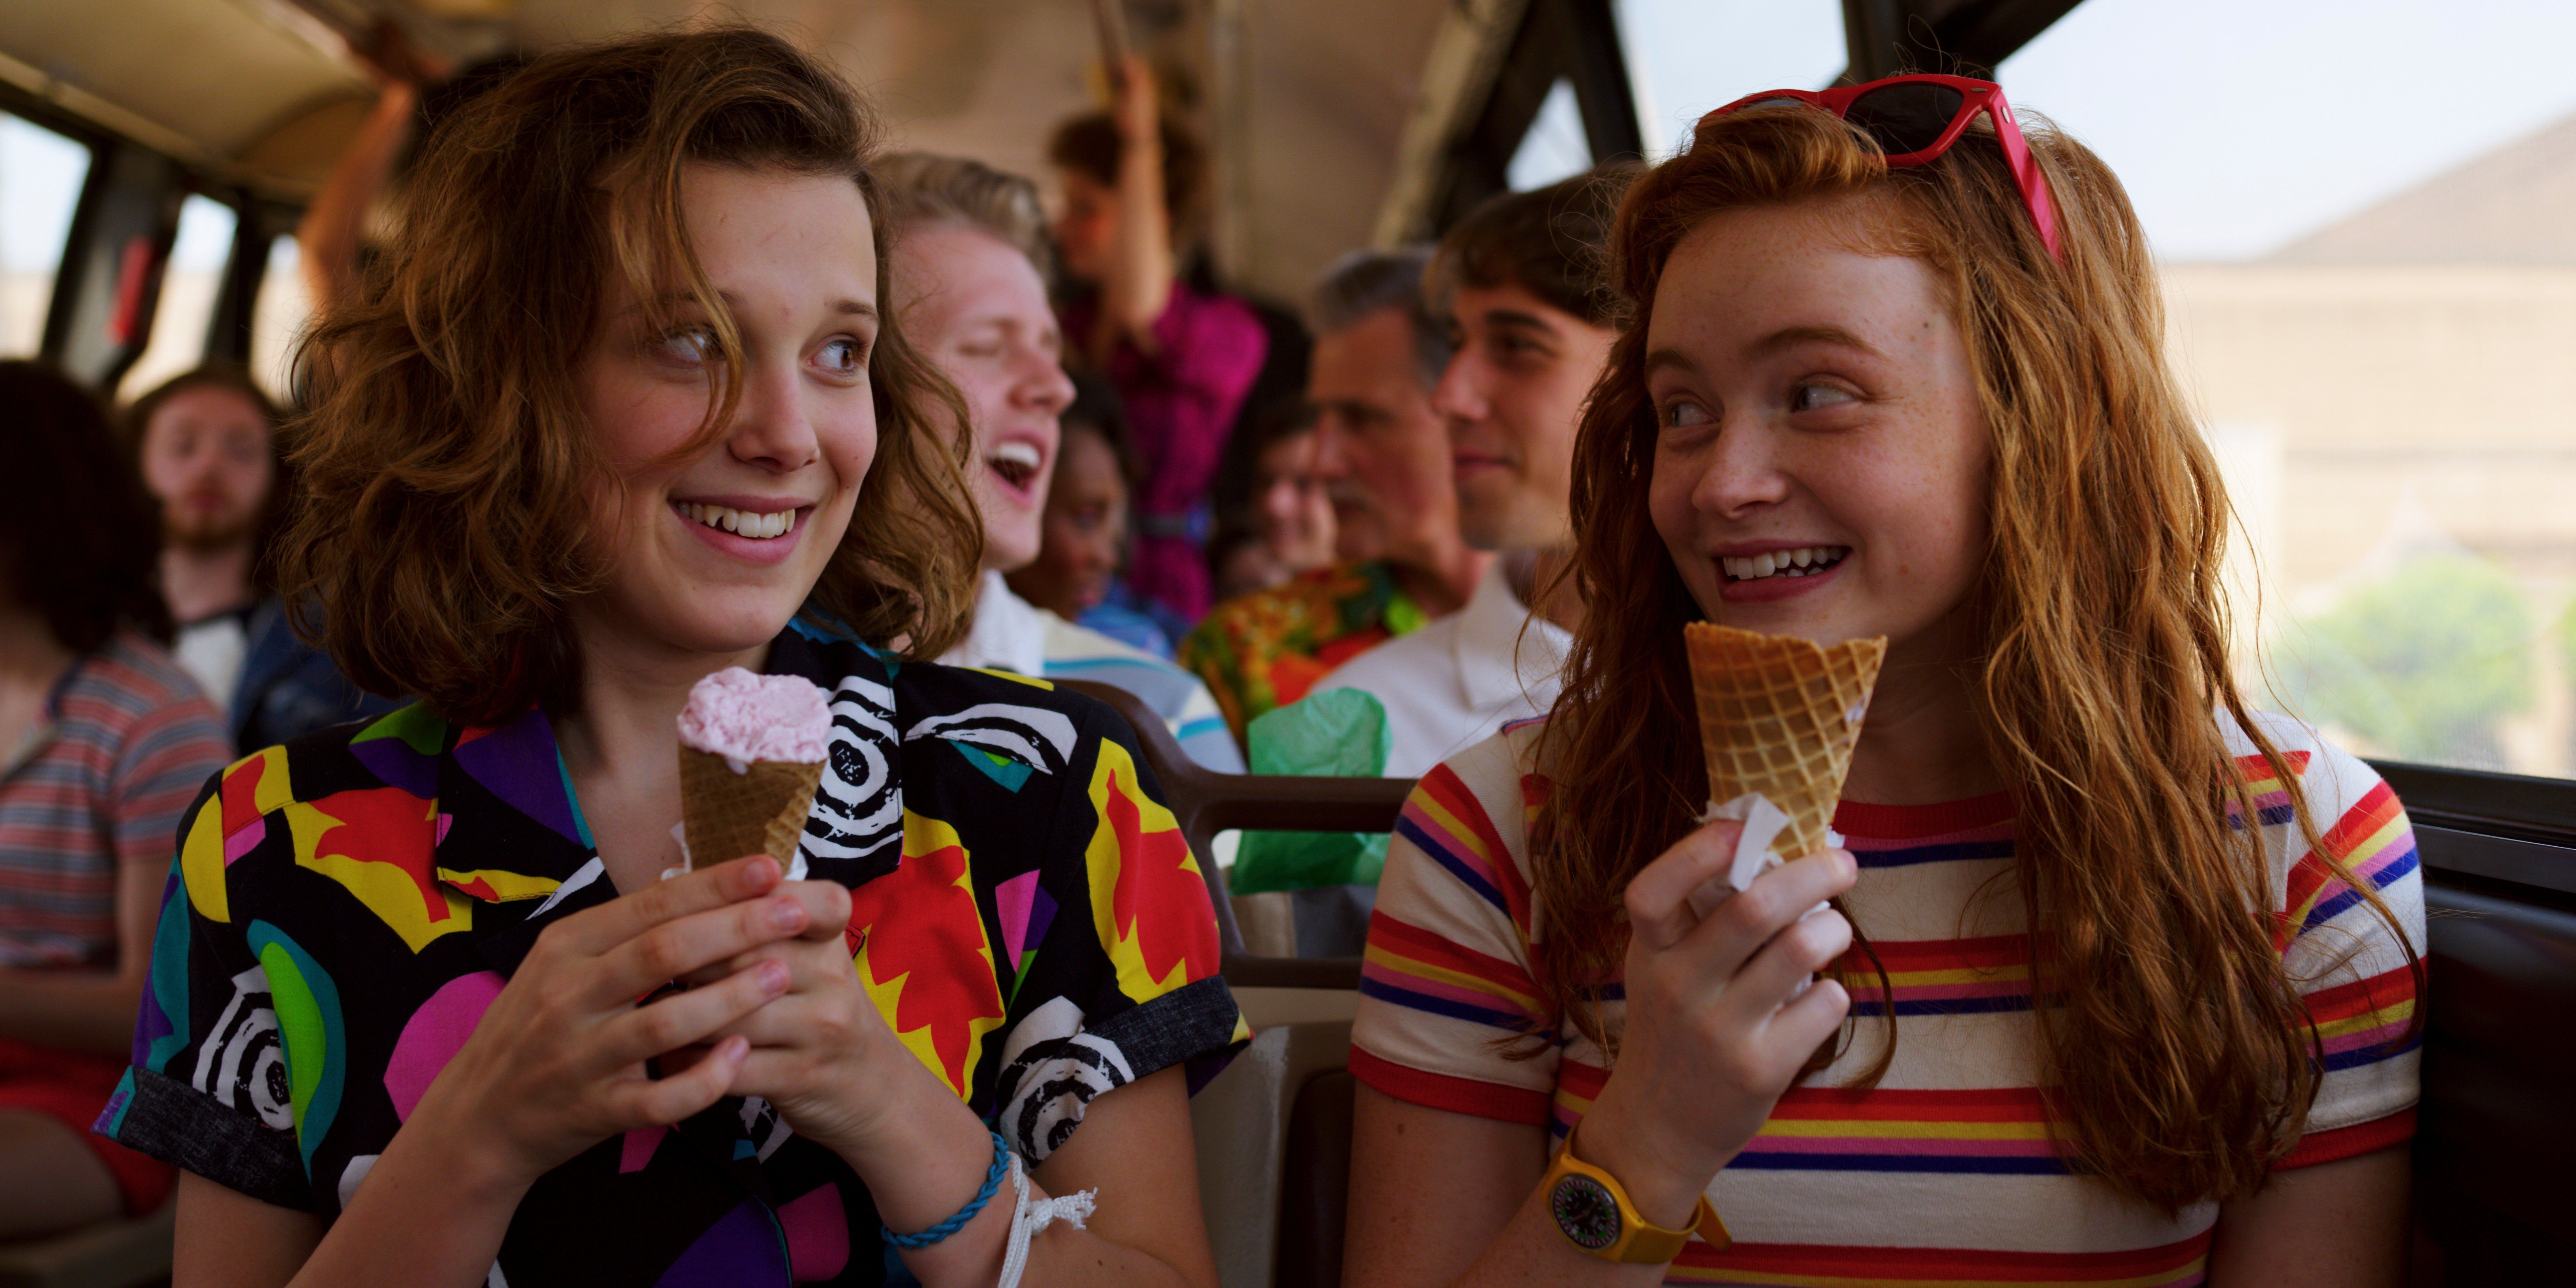 Sadie Sink and Millie Bobby Brown share a smile while eating ice cream on a bus in Stranger Things. - Stranger Things